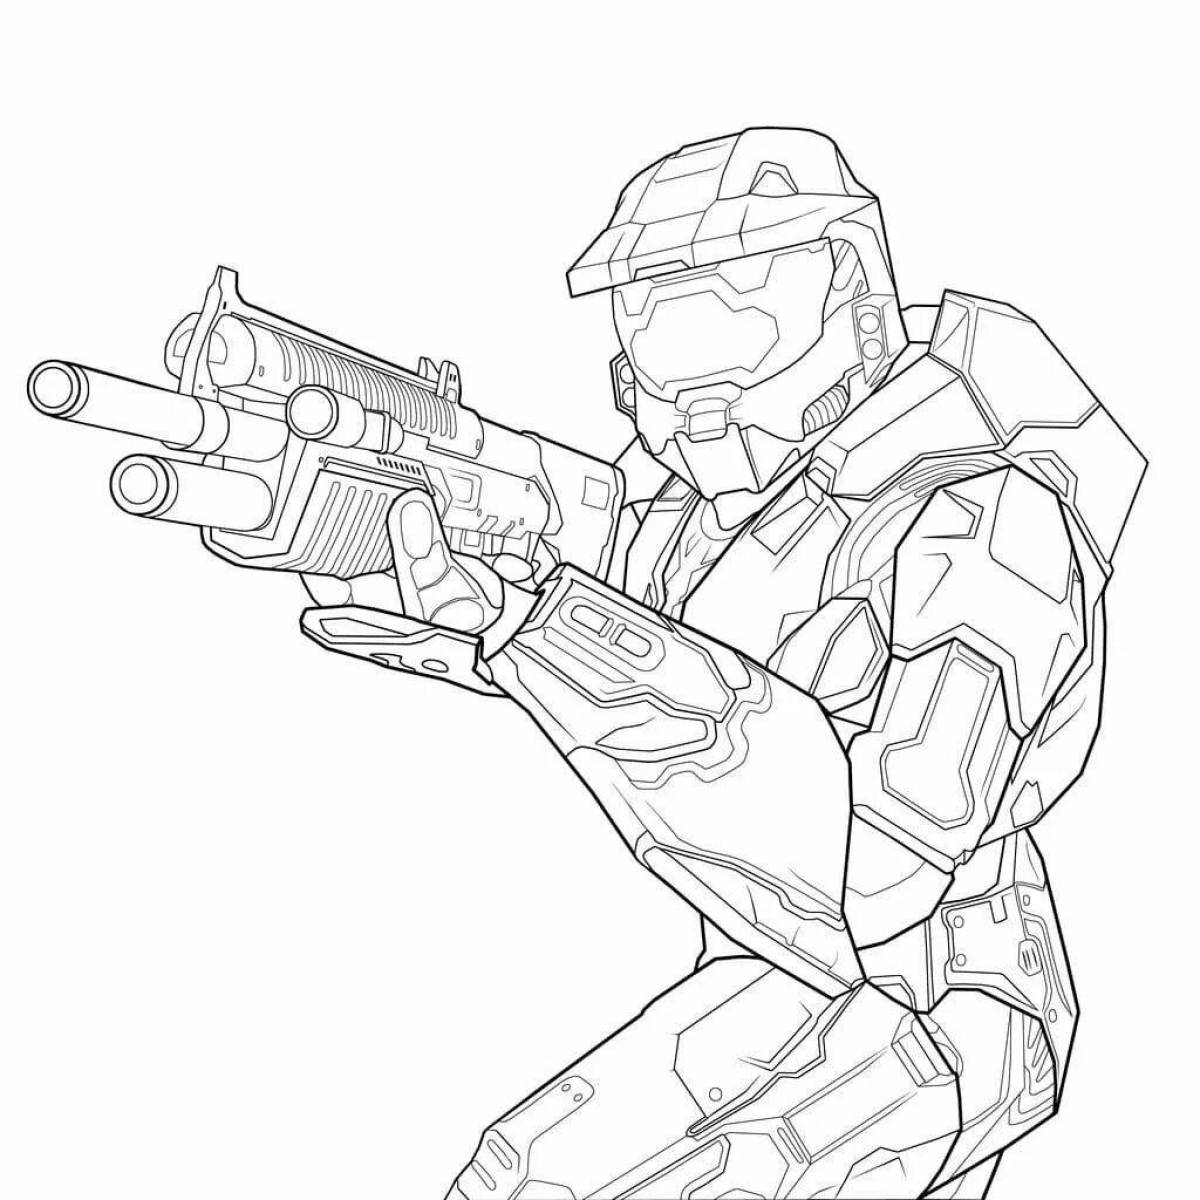 Attractive counter strike coloring page